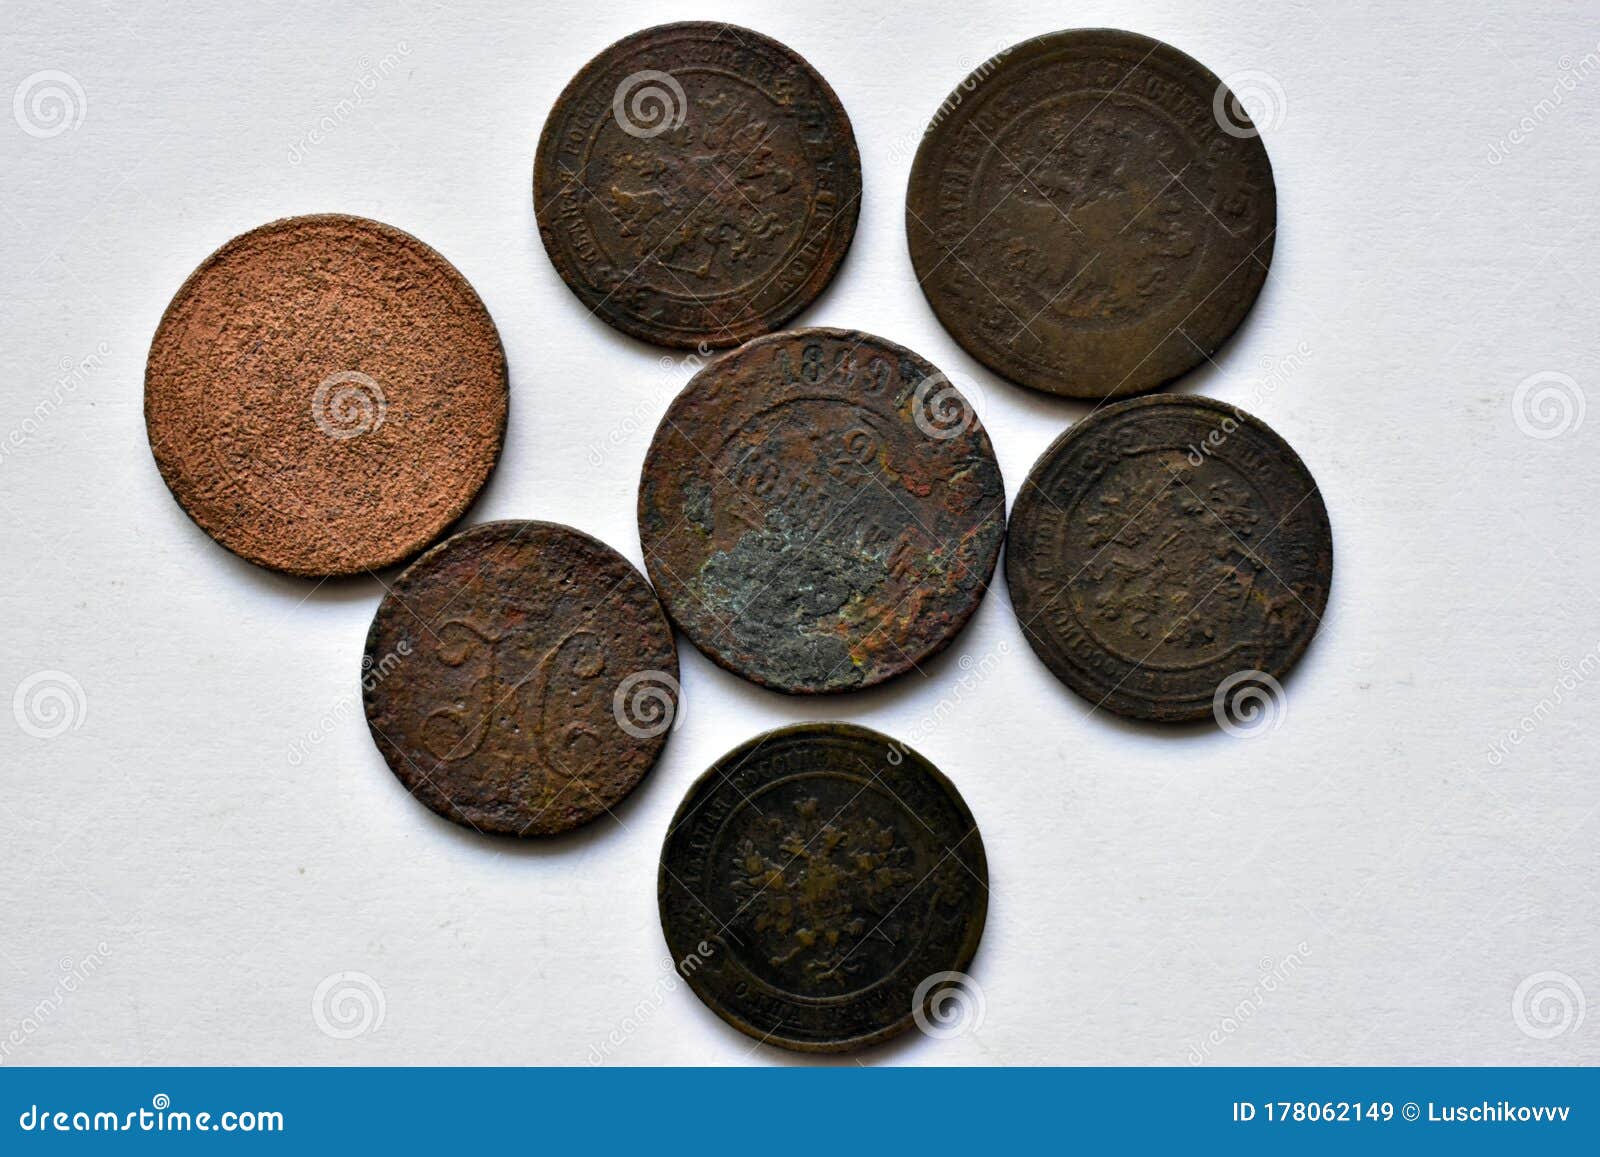 Old Imperial Russian Coins On A White Background ...